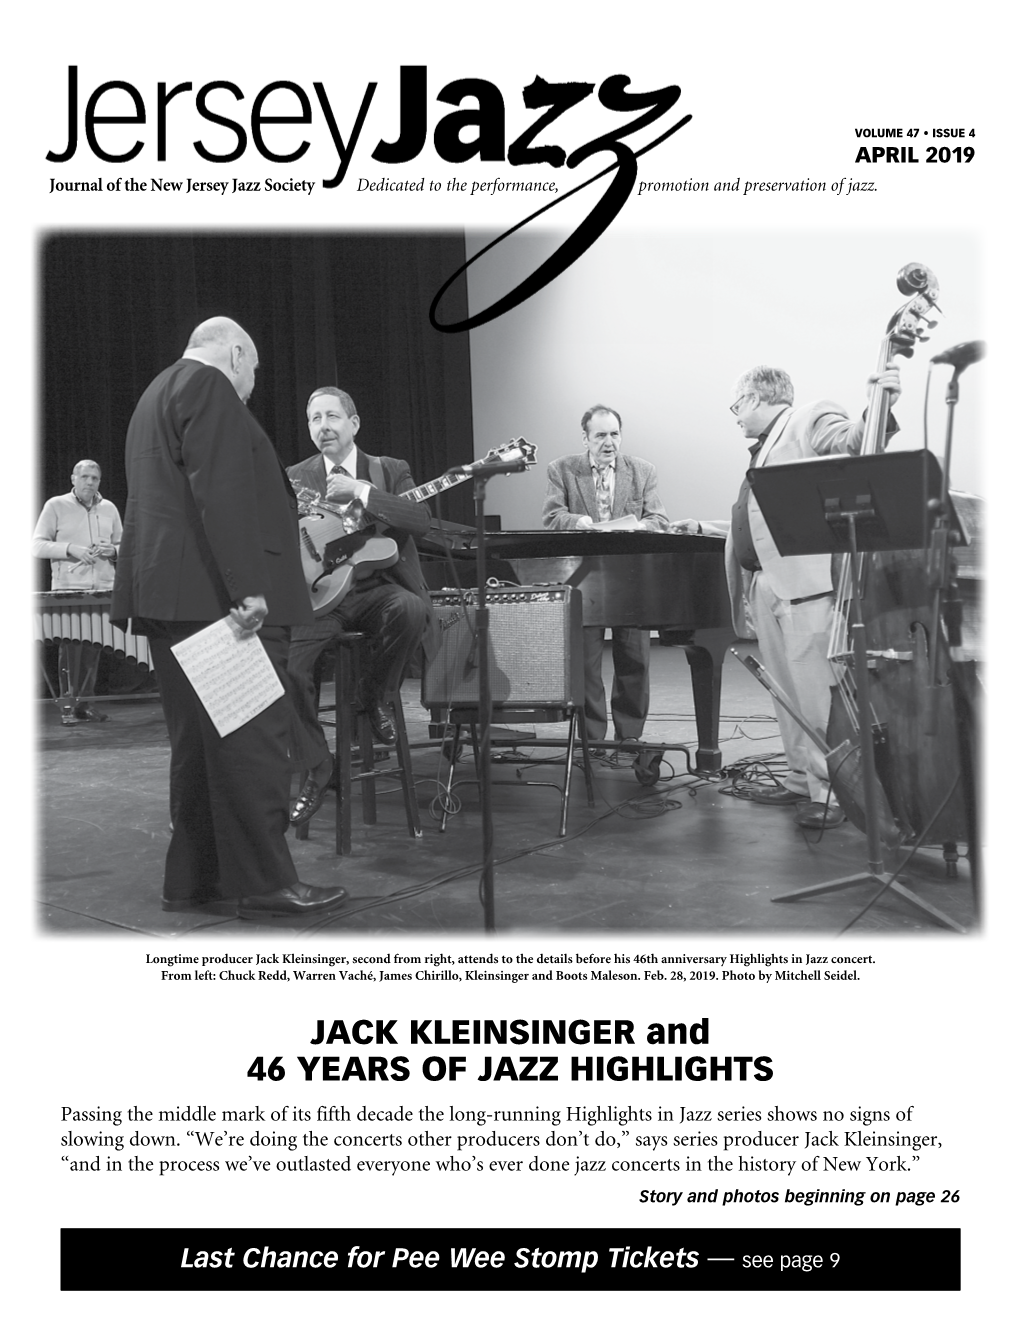 Jack Kleinsinger and 46 Years of Jazz Highlights Passing the Middle Mark of Its Fifth Decade the Long-Running Highlights in Jazz Series Shows No Signs of Slowing Down